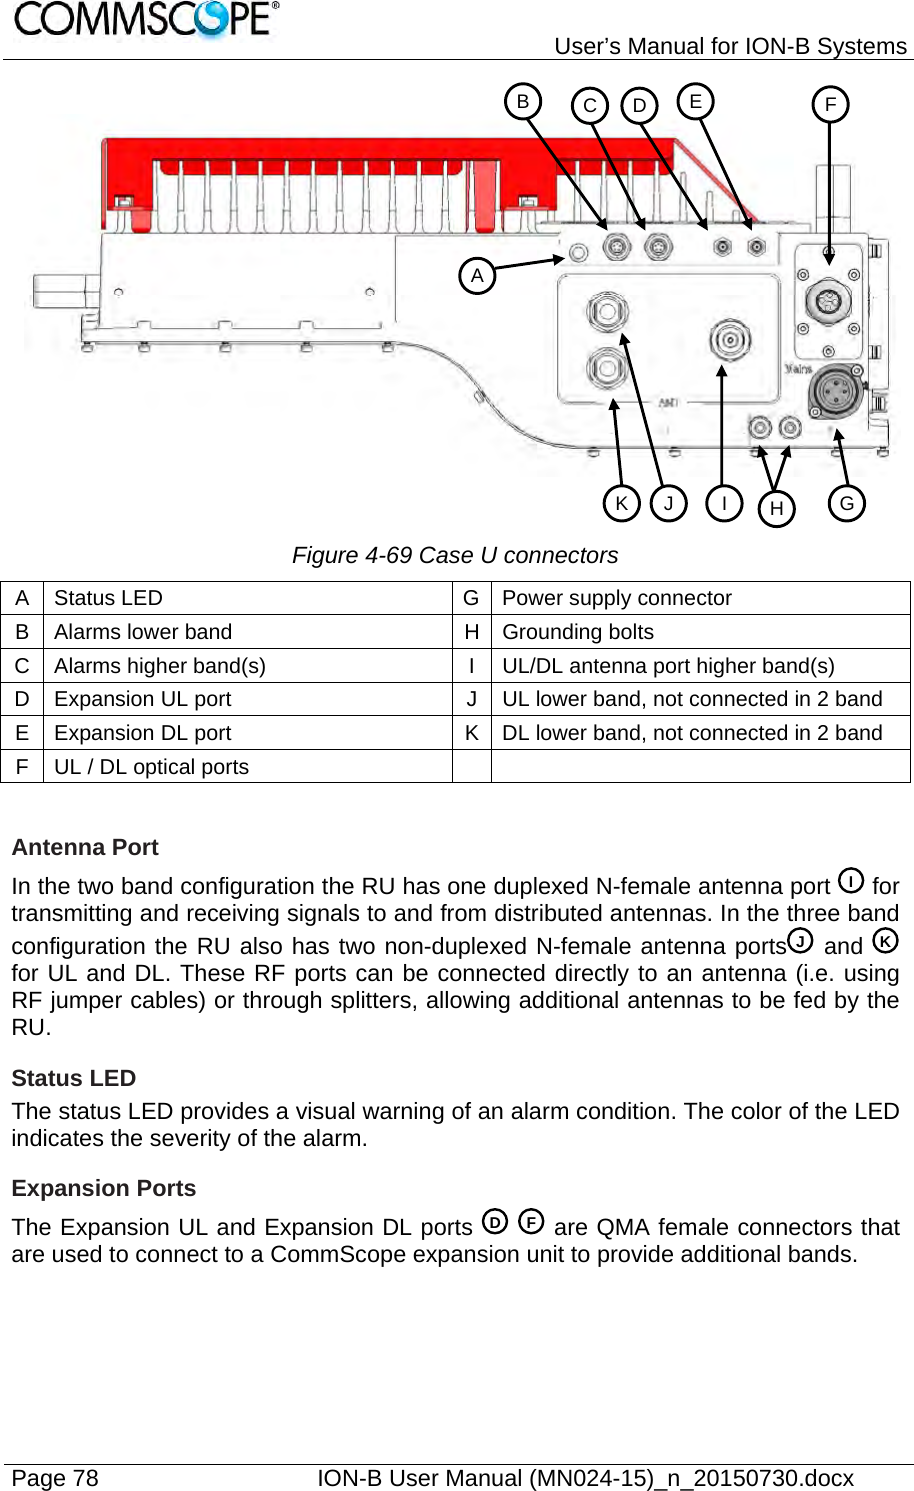   User’s Manual for ION-B Systems Page 78    ION-B User Manual (MN024-15)_n_20150730.docx     Figure 4-69 Case U connectors A  Status LED  G Power supply connector B  Alarms lower band  H Grounding bolts C  Alarms higher band(s)  I  UL/DL antenna port higher band(s) D  Expansion UL port  J  UL lower band, not connected in 2 band E  Expansion DL port  K  DL lower band, not connected in 2 band F  UL / DL optical ports      Antenna Port In the two band configuration the RU has one duplexed N-female antenna port   for transmitting and receiving signals to and from distributed antennas. In the three band configuration the RU also has two non-duplexed N-female antenna ports  and   for UL and DL. These RF ports can be connected directly to an antenna (i.e. using RF jumper cables) or through splitters, allowing additional antennas to be fed by the RU. Status LED The status LED provides a visual warning of an alarm condition. The color of the LED indicates the severity of the alarm. Expansion Ports The Expansion UL and Expansion DL ports     are QMA female connectors that are used to connect to a CommScope expansion unit to provide additional bands. FDKJ IABC D EH  GI JF K